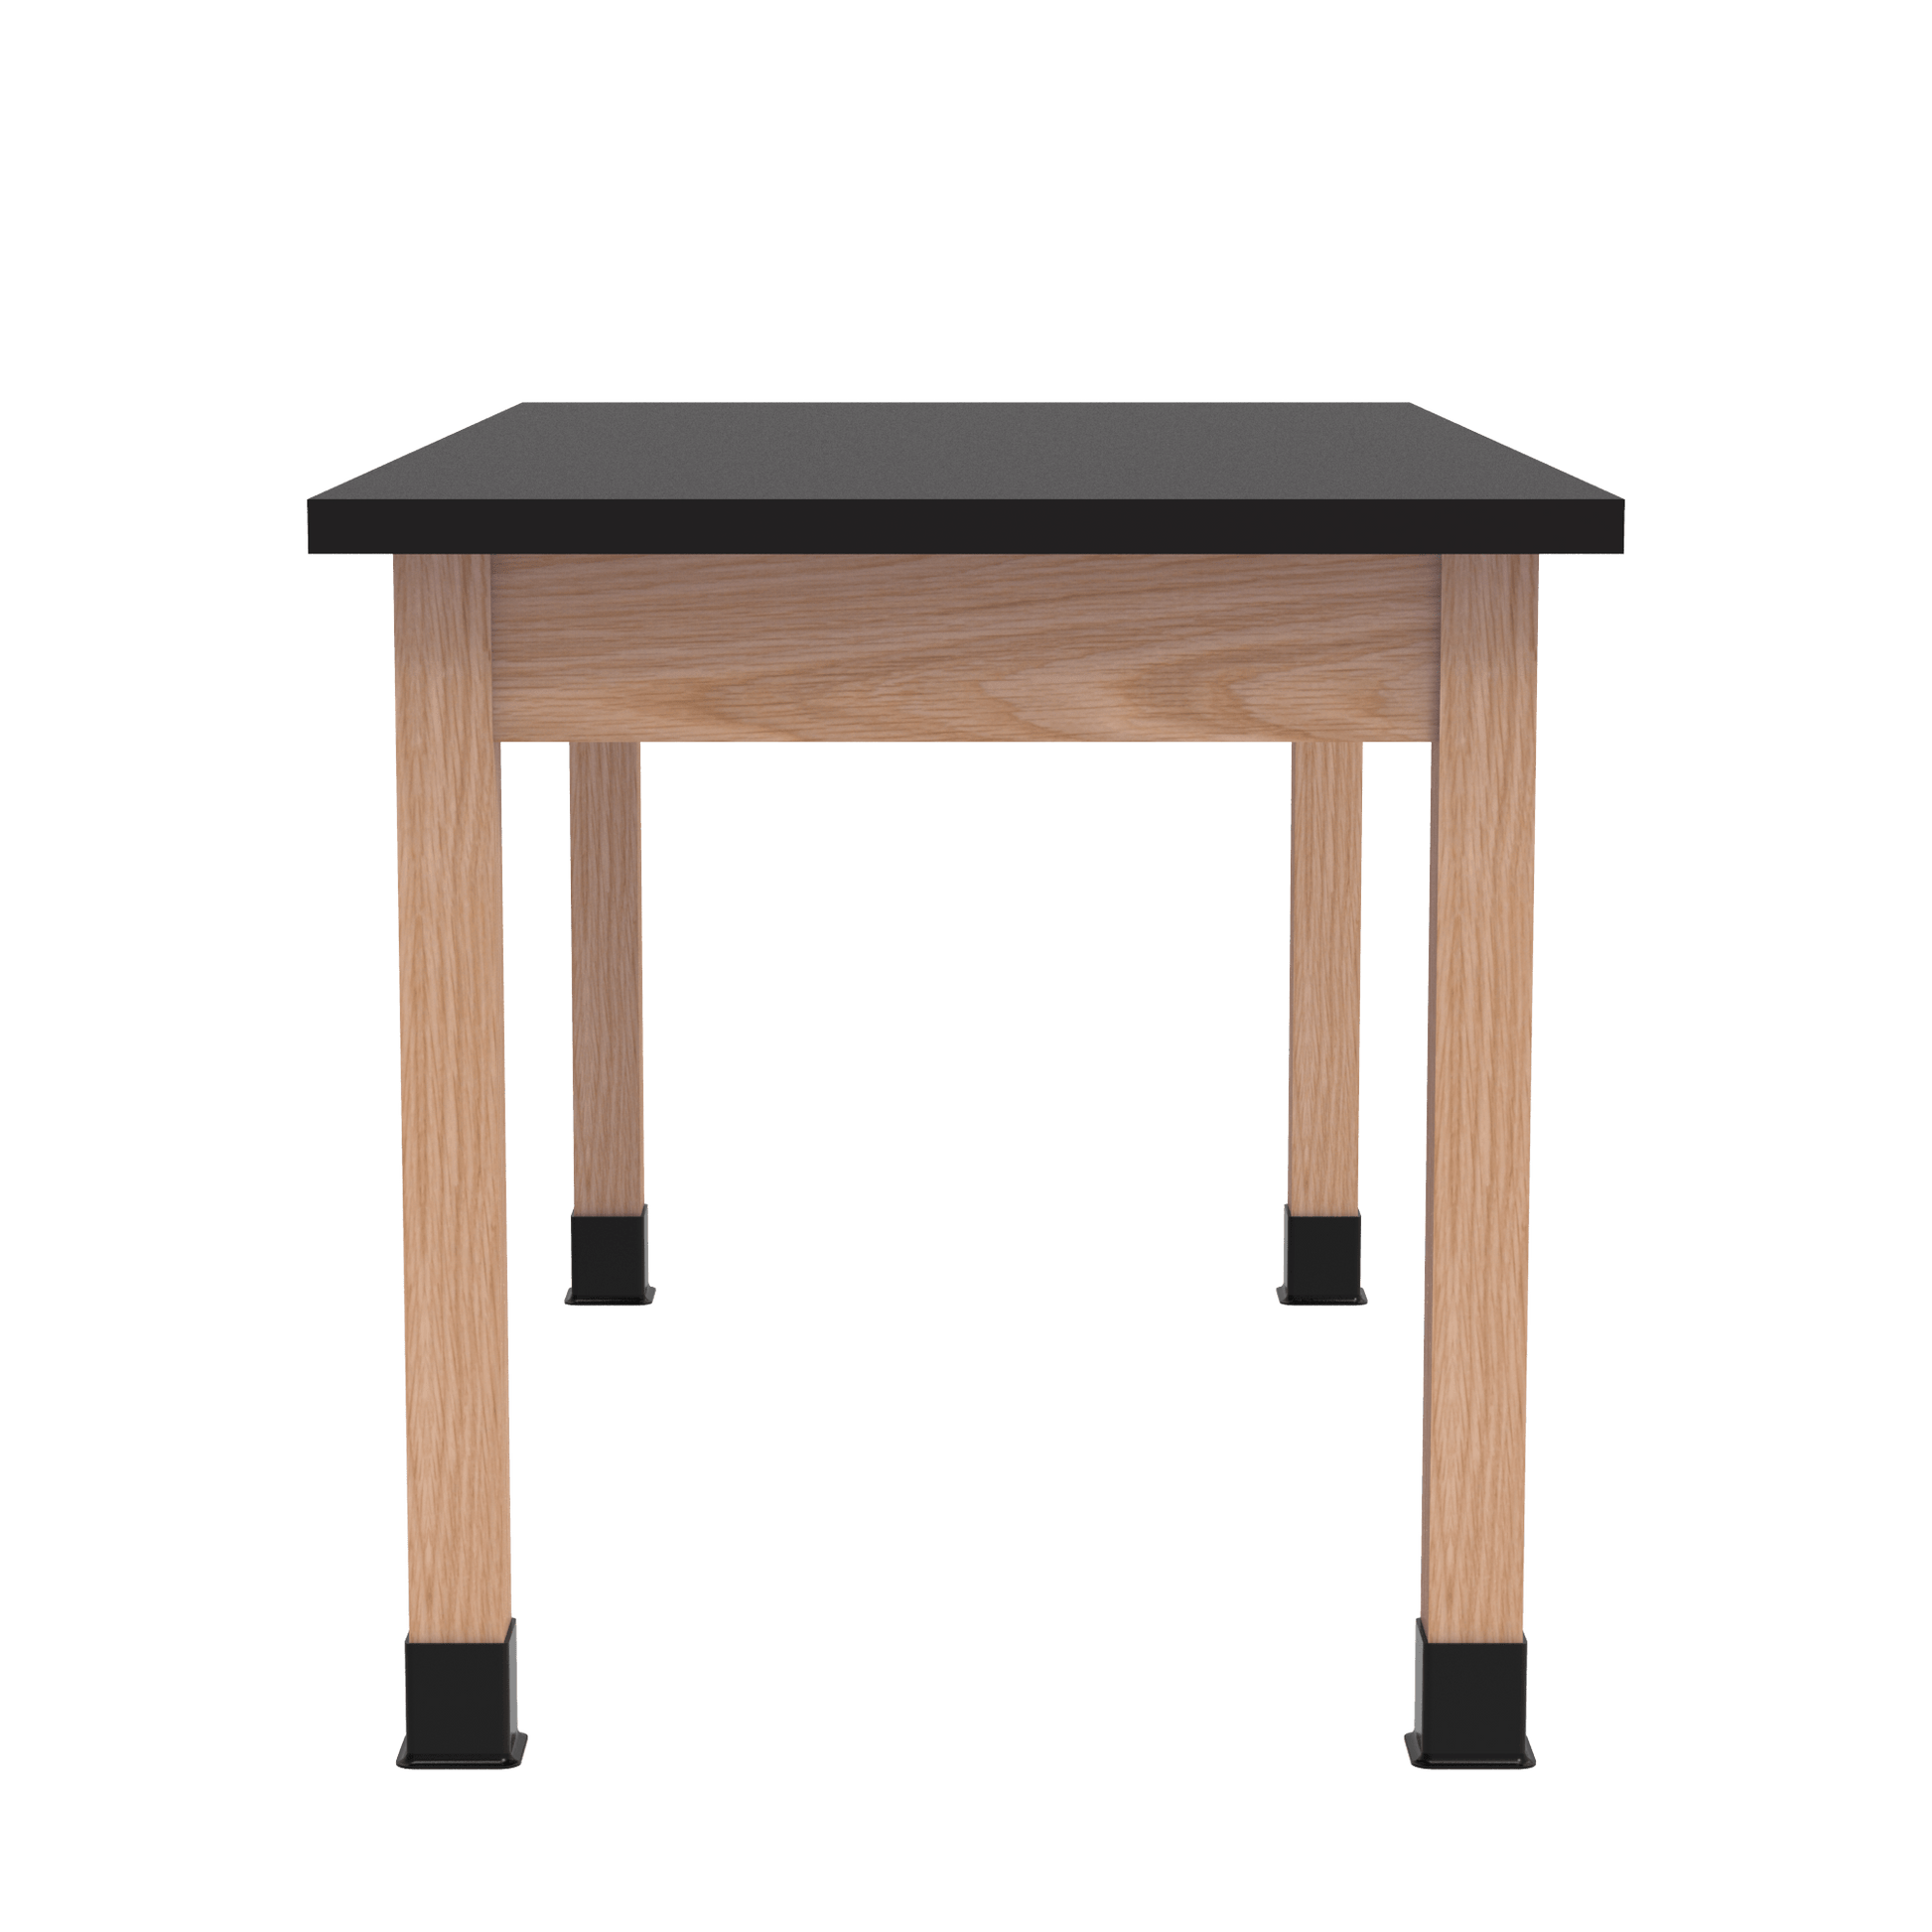 Diversified Woodcrafts Science Table w/ Book Compartment - 48" W x 30" D - Solid Oak Frame and Adjustable Glides - SchoolOutlet